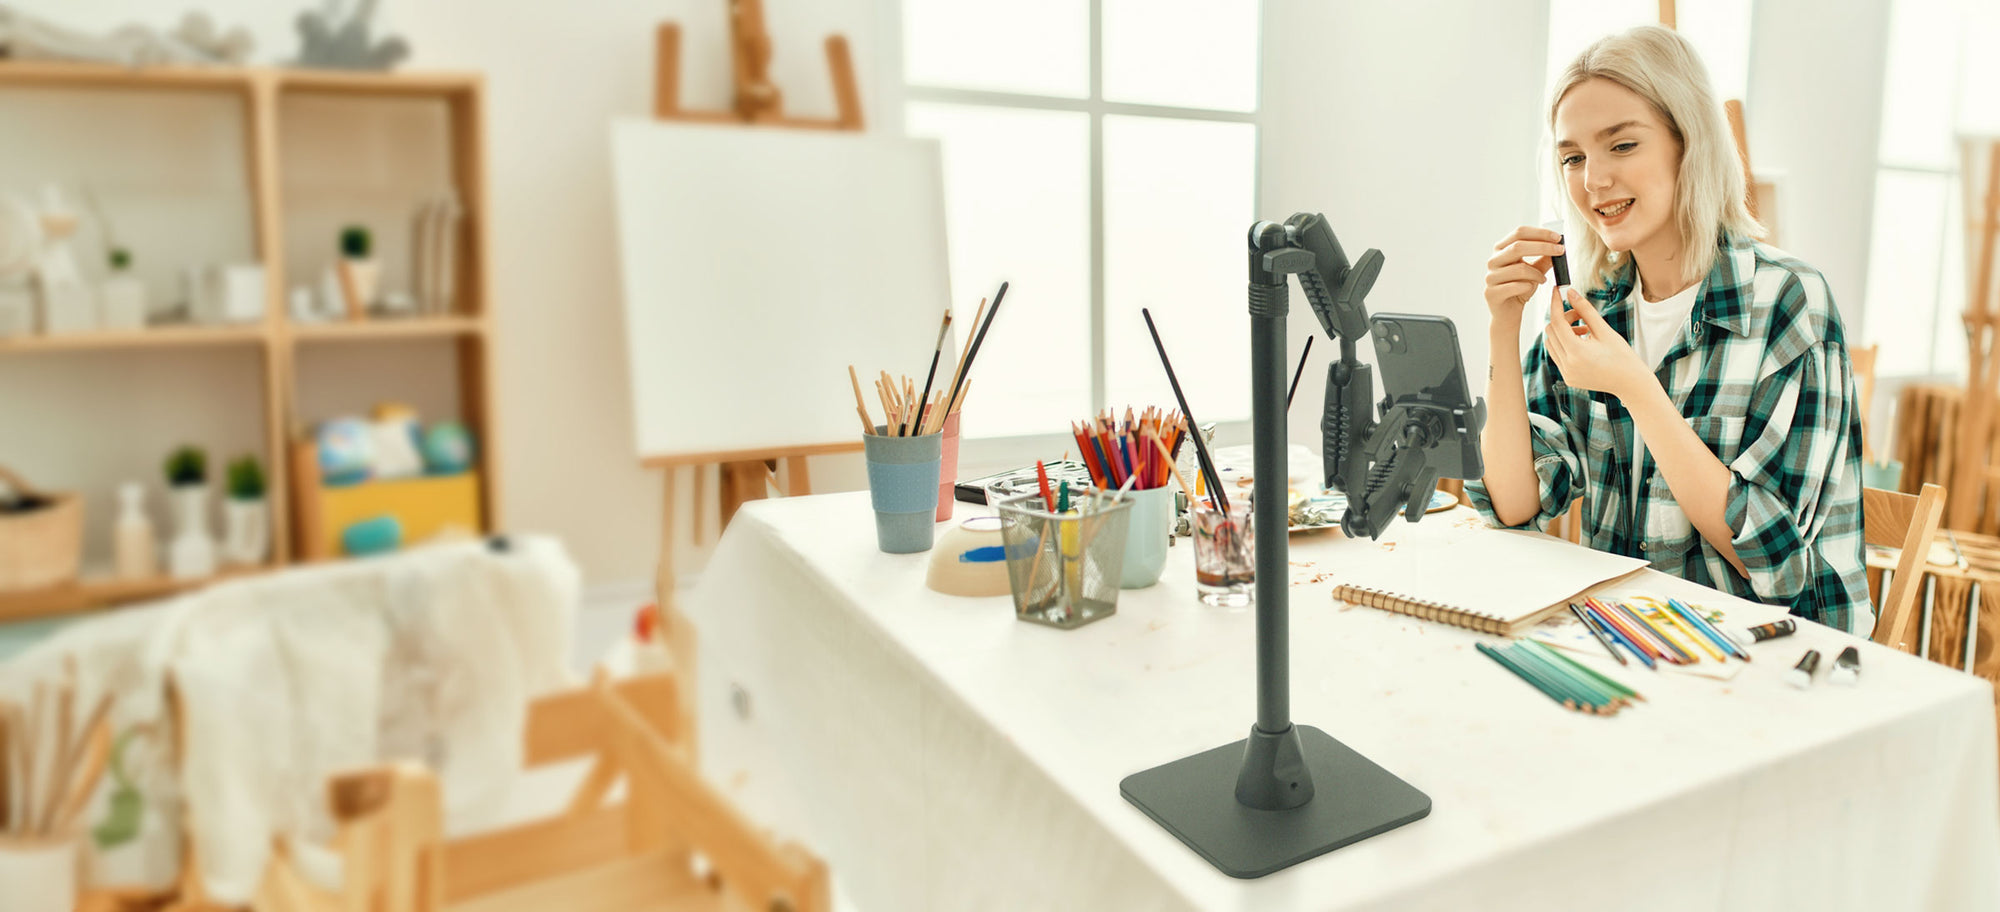 arkon mounts remarkable creator mount for artists and content creators